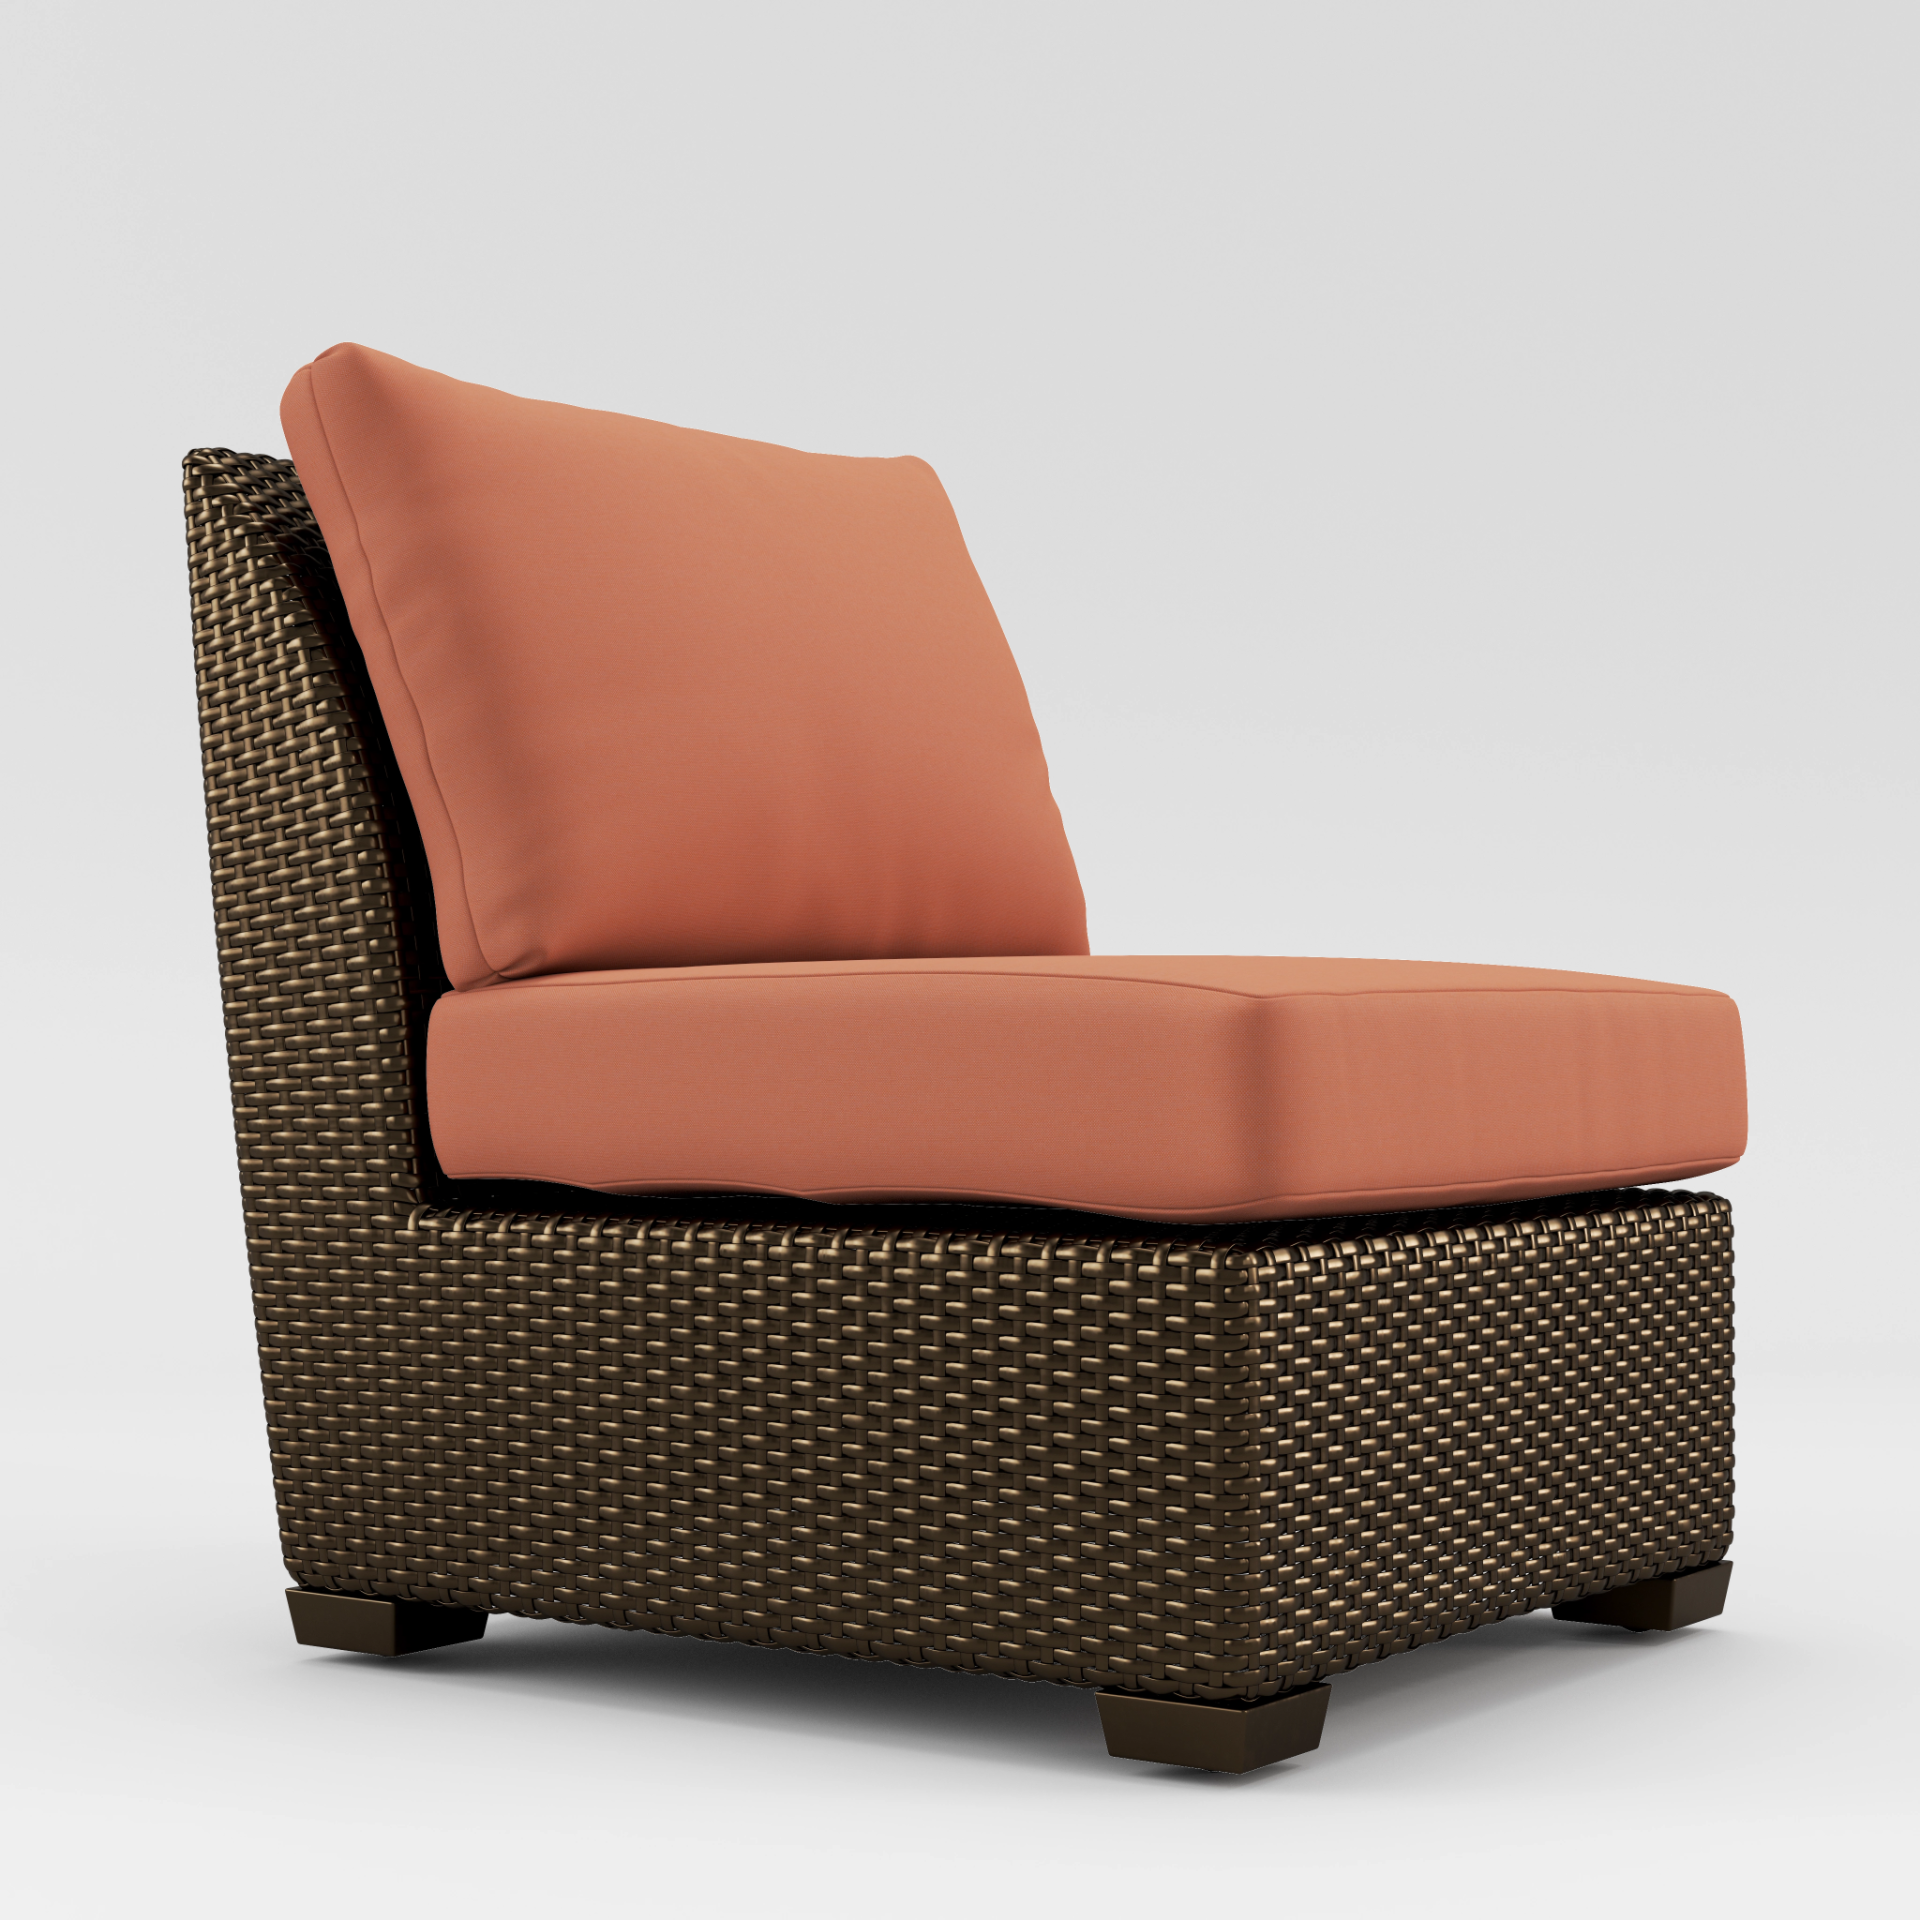 Fusion Central Armless Chair - Pillow Back by Brown Jordan